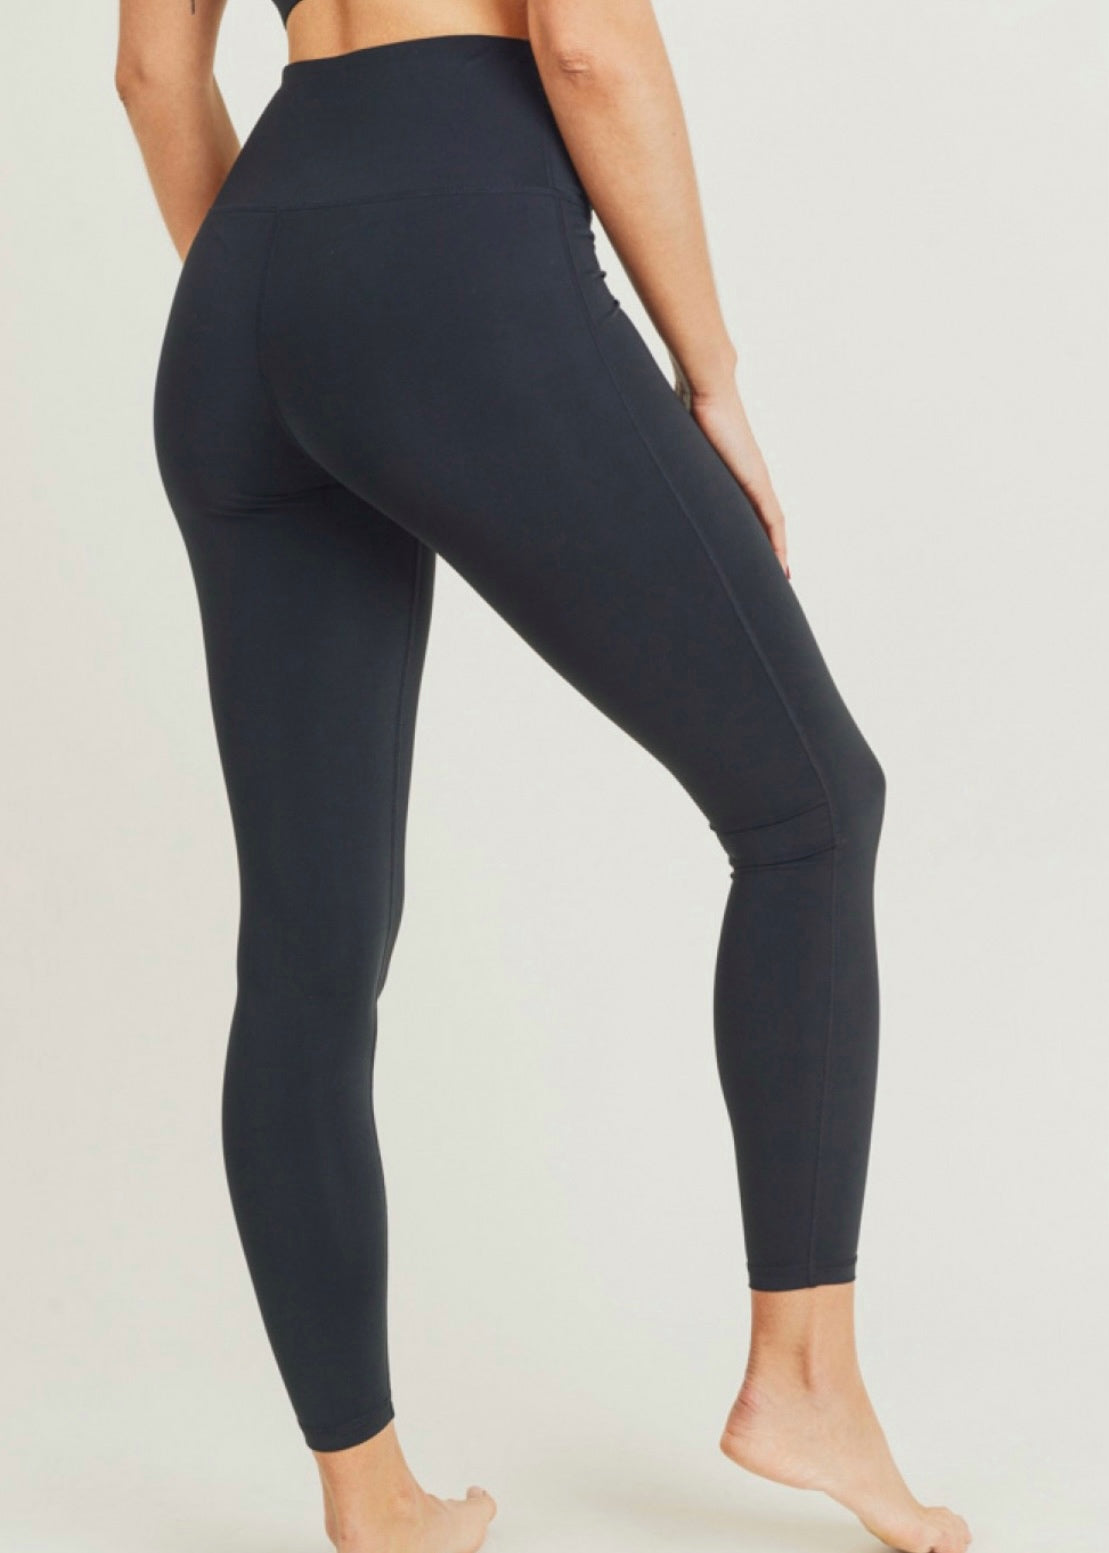 Black Performance leggings made out of 100% recycled nylon and Lycra blend. Leggings have high waist, discreet pouch on waistband, moisture wicking and four way stretch. 